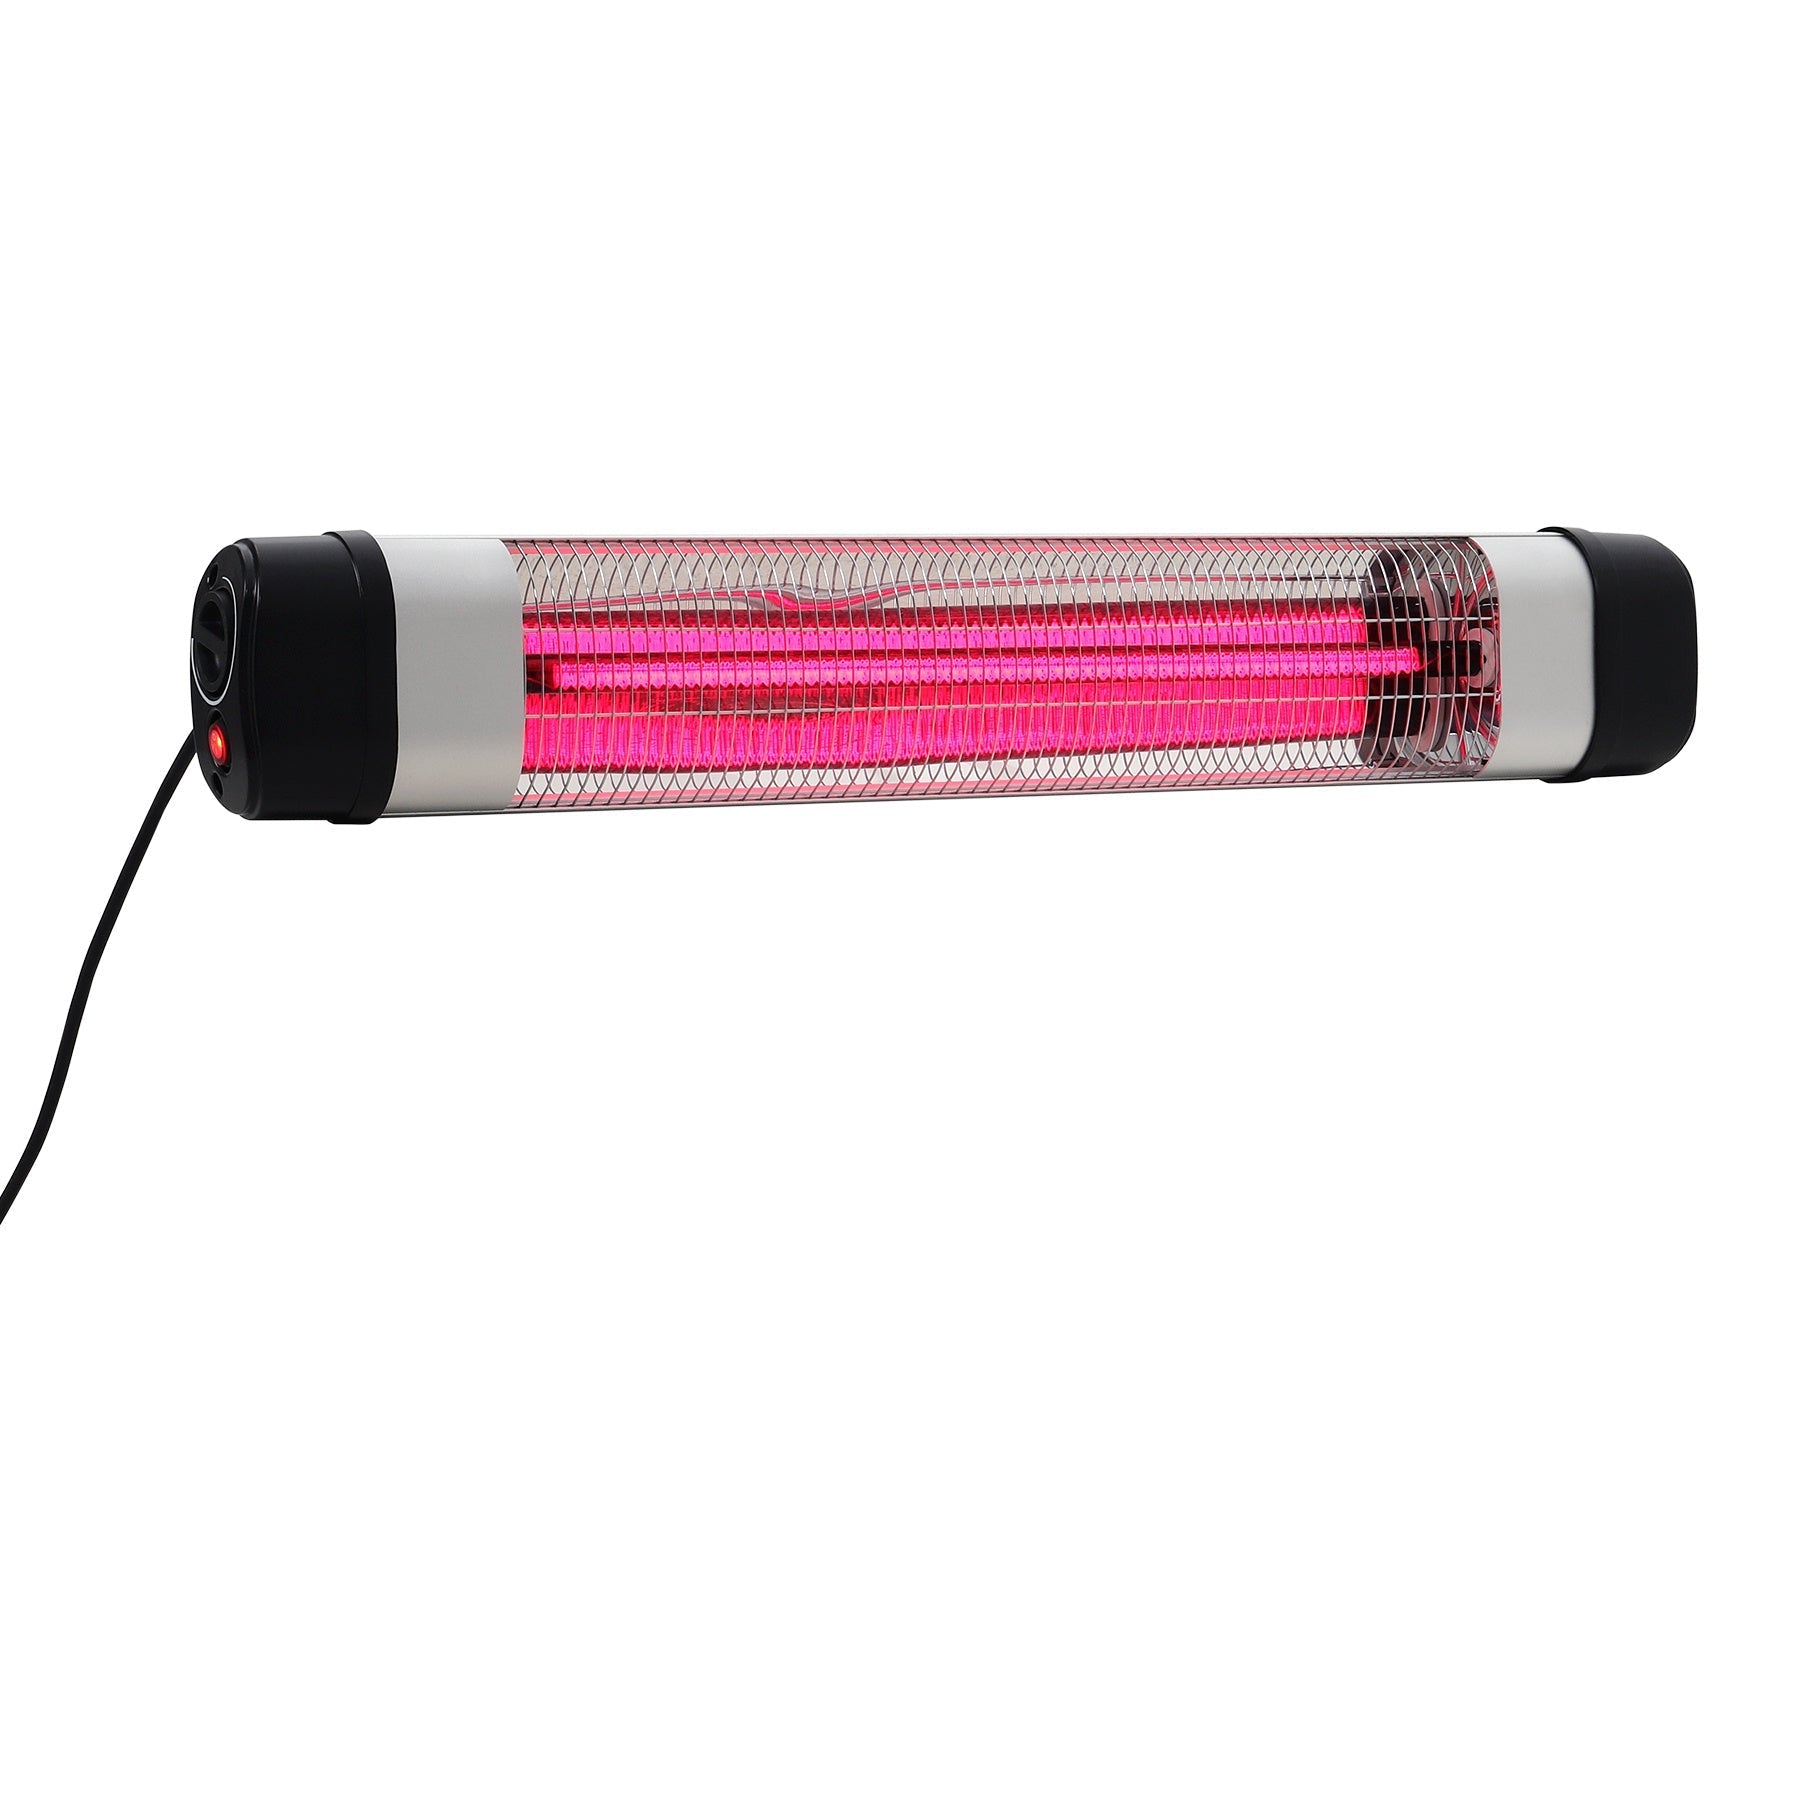 2kW Adjustable Garden Outdoor Warmer Wall Mounted Patio Heater Pink Light patio heater Living and Home 